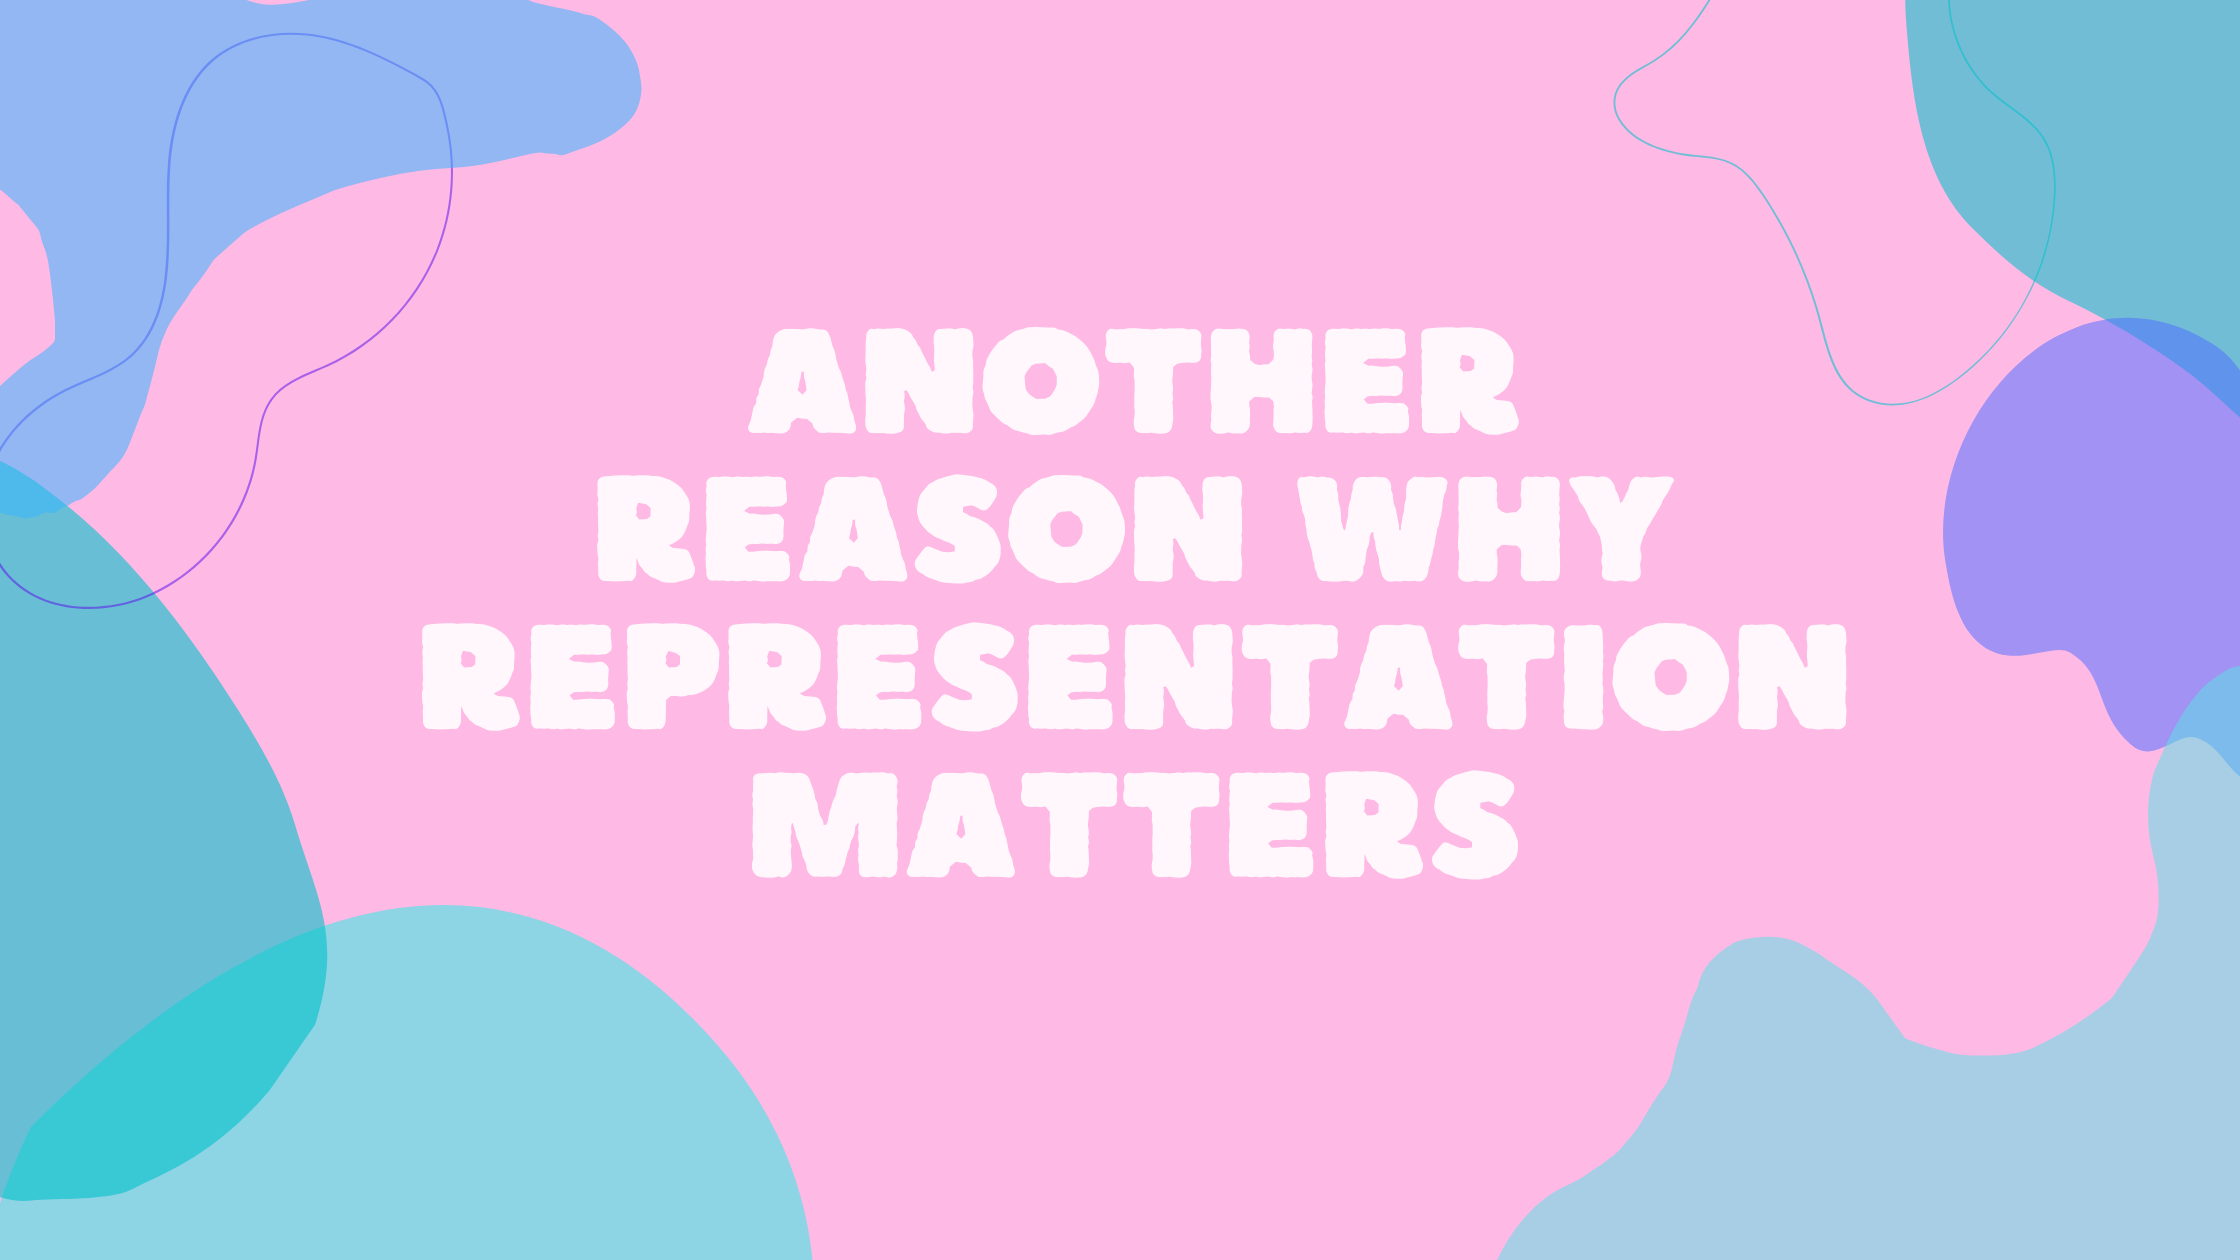 another word for representation is